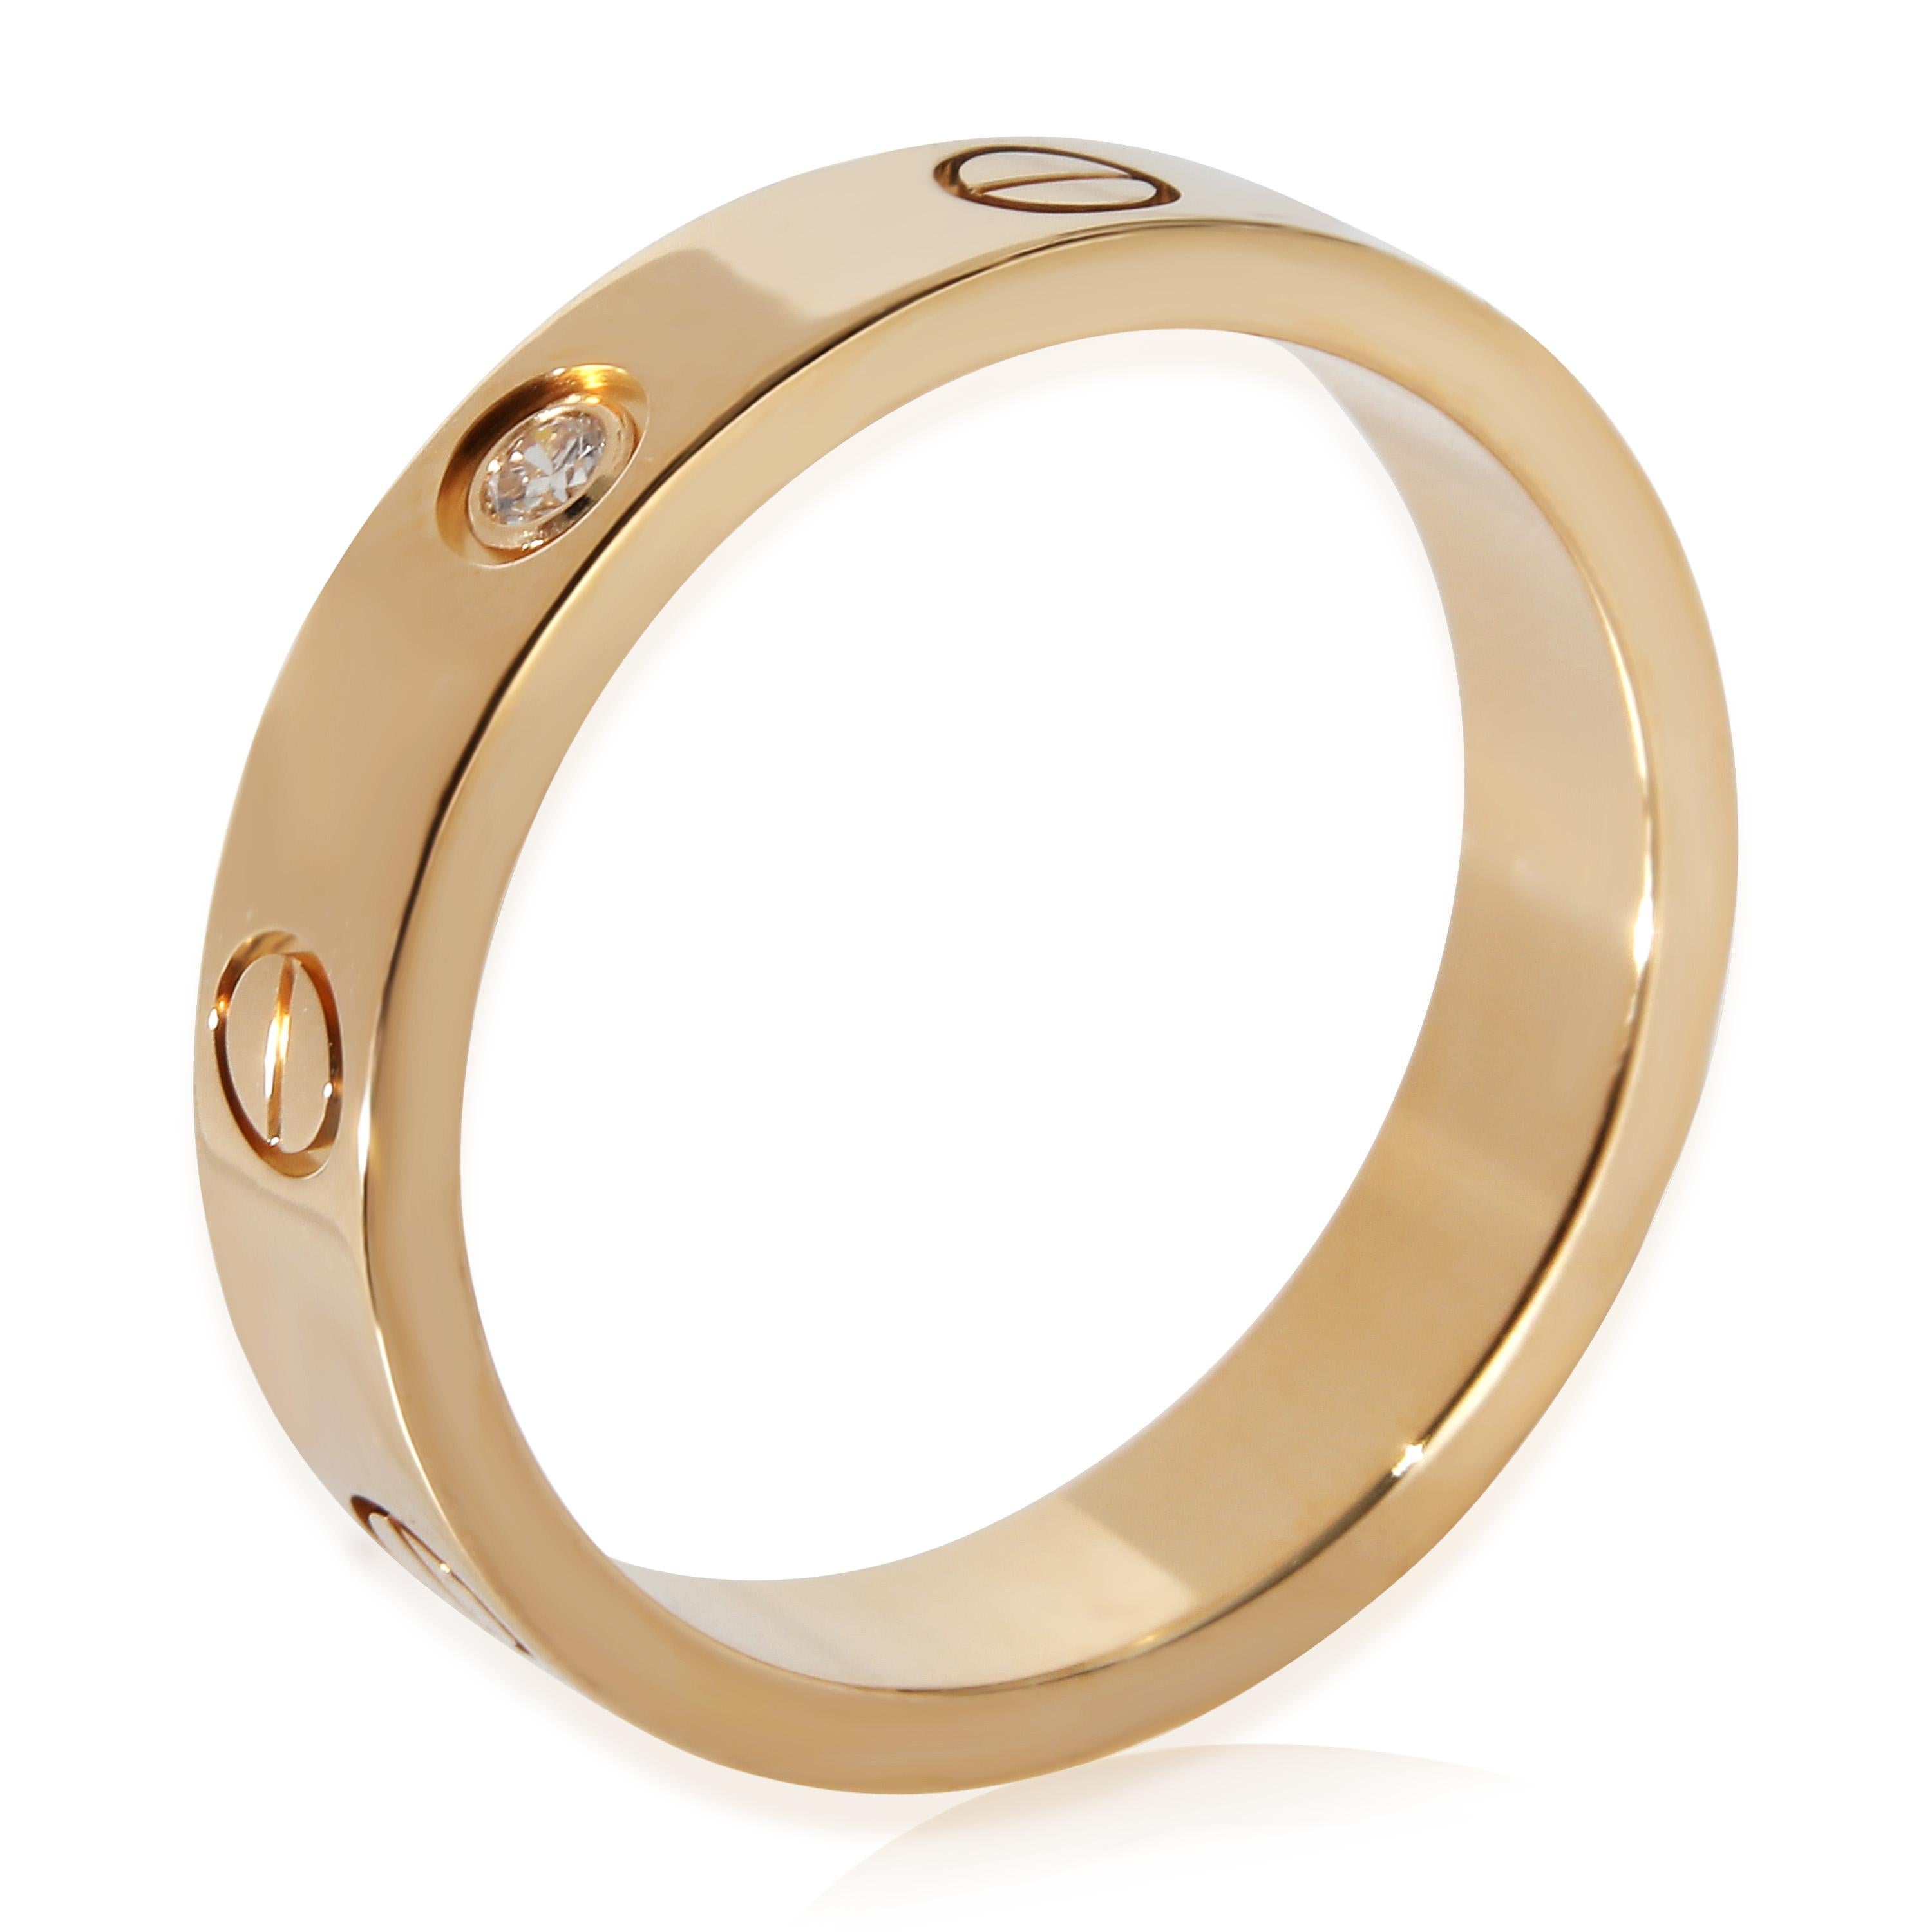 Cartier Love Diamond Ring in 18K Yellow Gold 0.02 ctw

PRIMARY DETAILS
SKU: 132833
Listing Title: Cartier Love Diamond Ring in 18K Yellow Gold 0.02 ctw
Condition Description: Cartier's Love collection is the epitome of iconic, from the recognizable